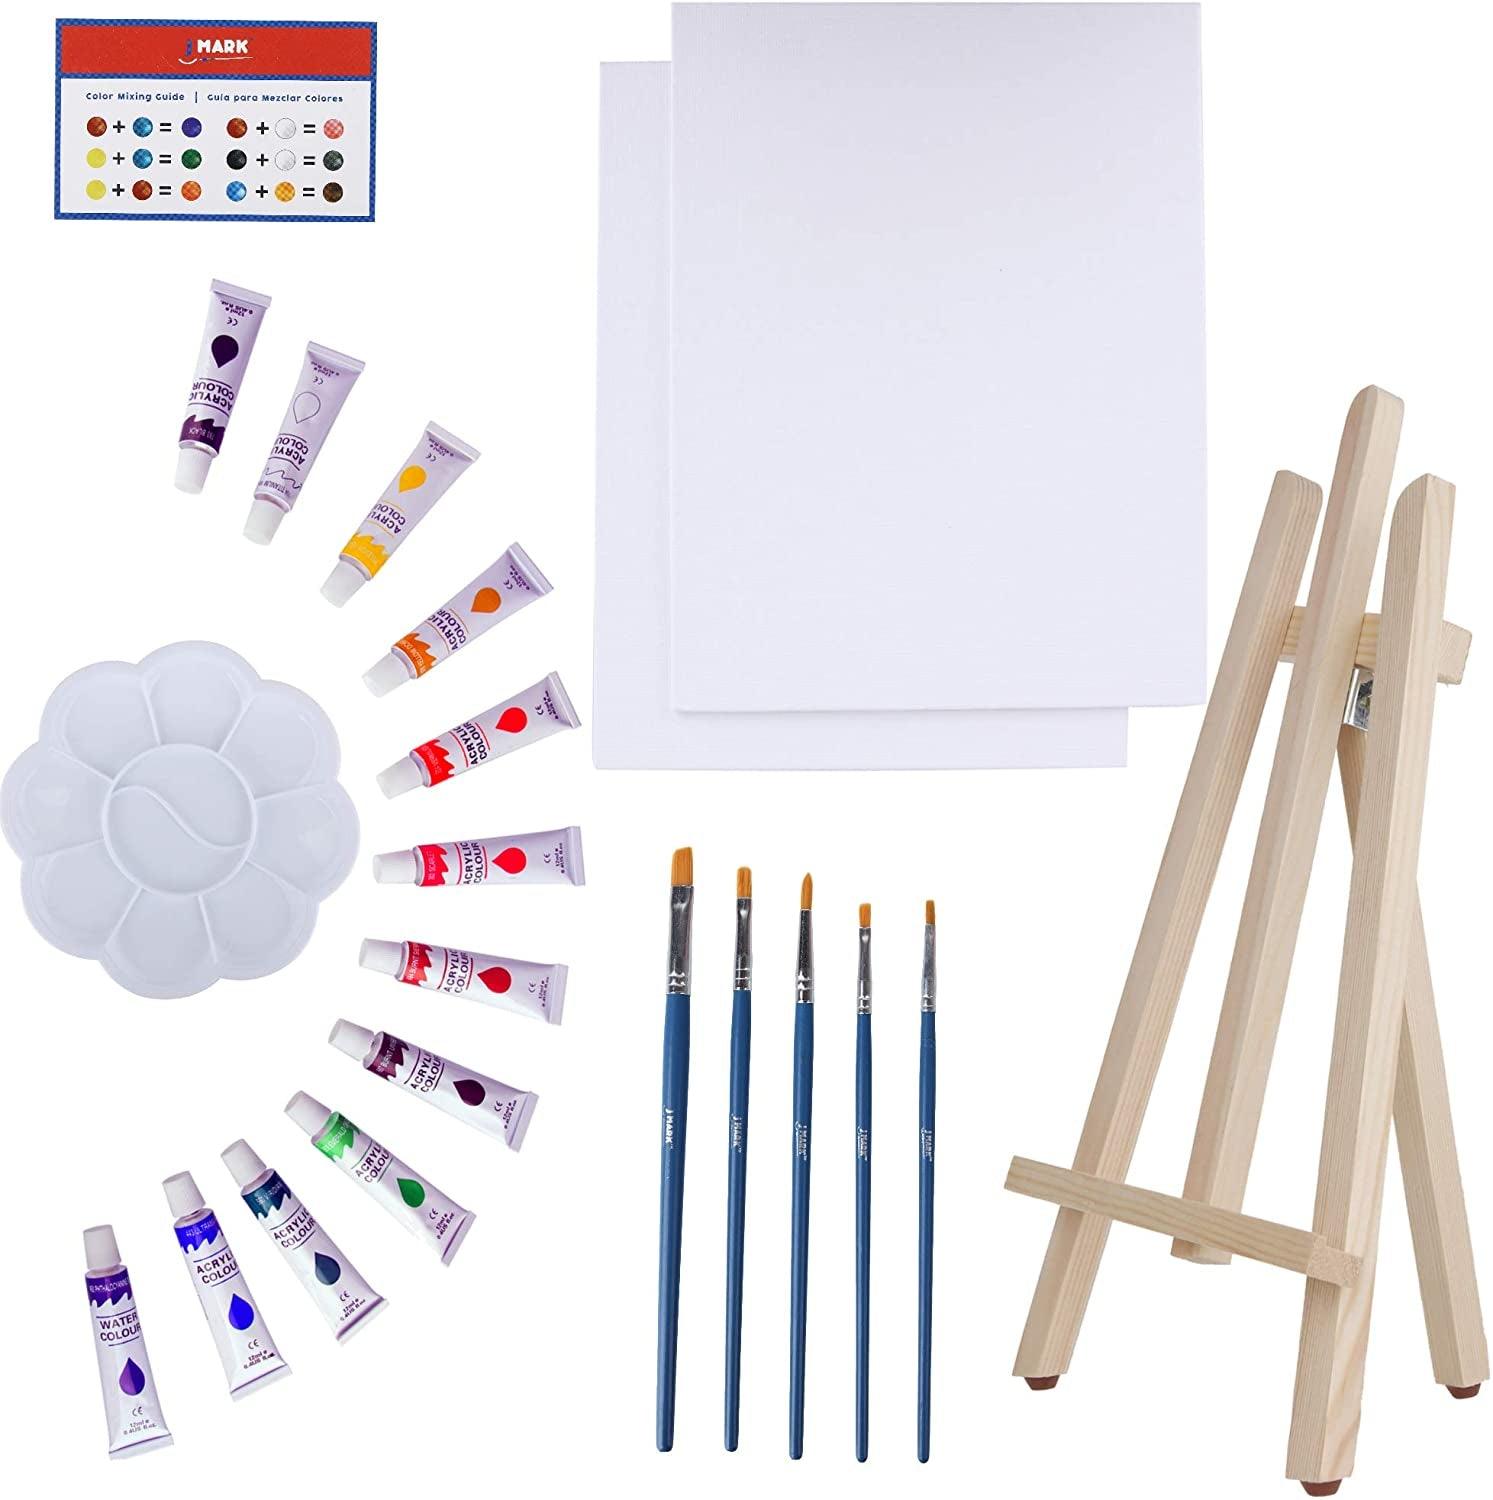 MERRIY Acrylic Paint Set for Kids, Art Painting Supplies Kit with 12  Paints, 10x 12 Stretched Canvas, Table Easel, Professional Premium Paint  Set